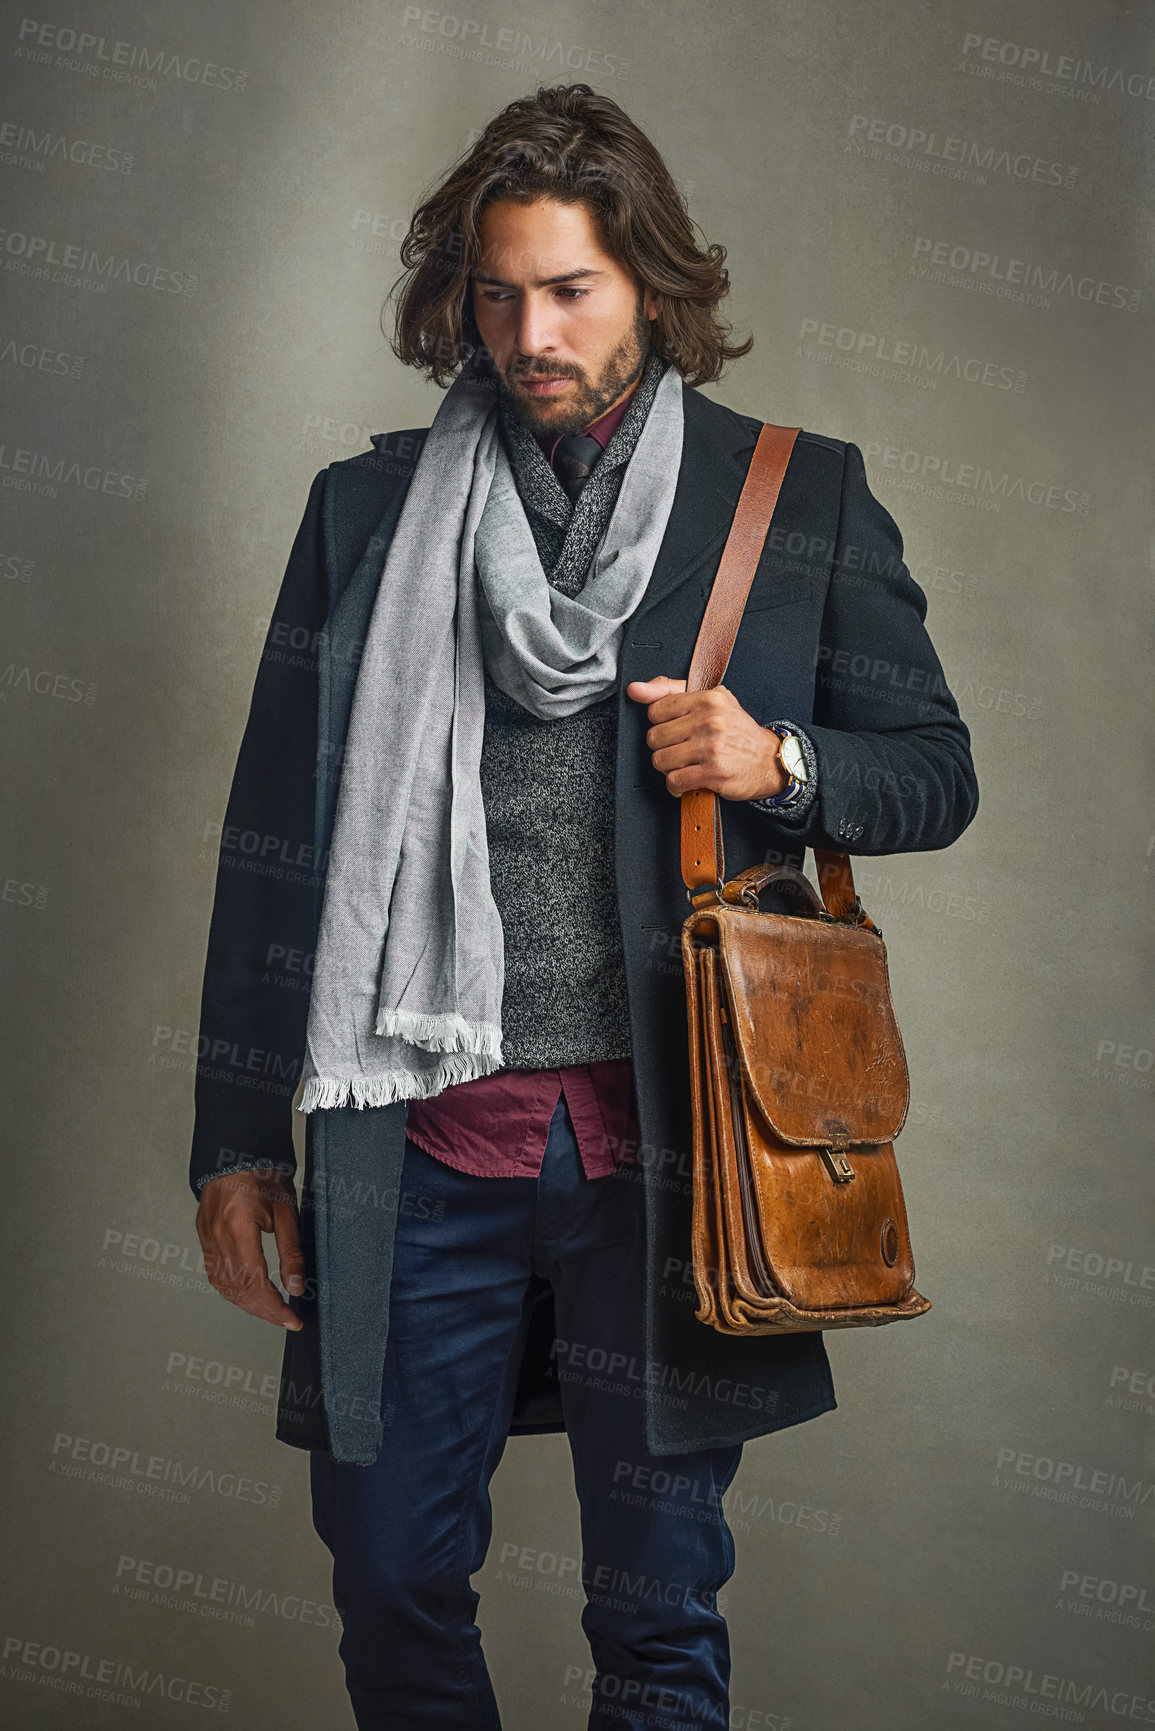 Buy stock photo Shot of a stylishly dressed man posing with a leather satchel in the studio